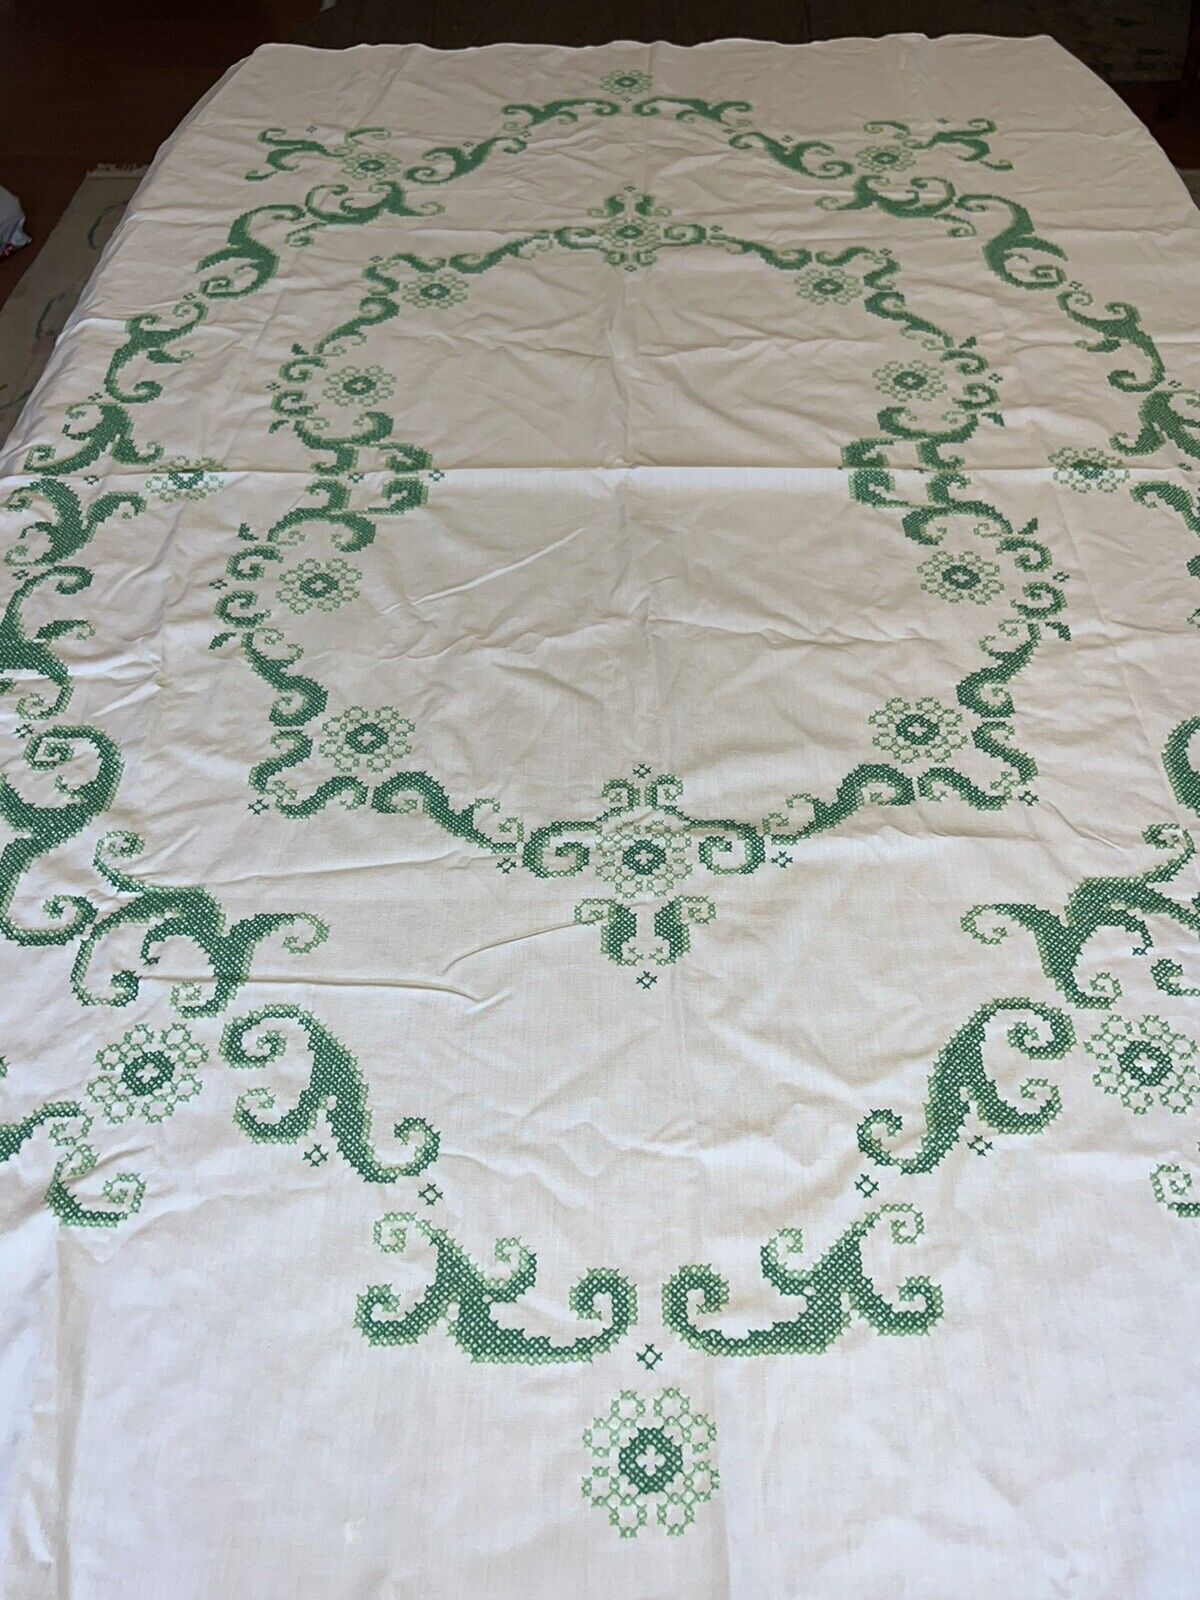 Vintage Cottage Tablecloth Cross Stitch Scalloped Edges White Green 48.5” X 64”